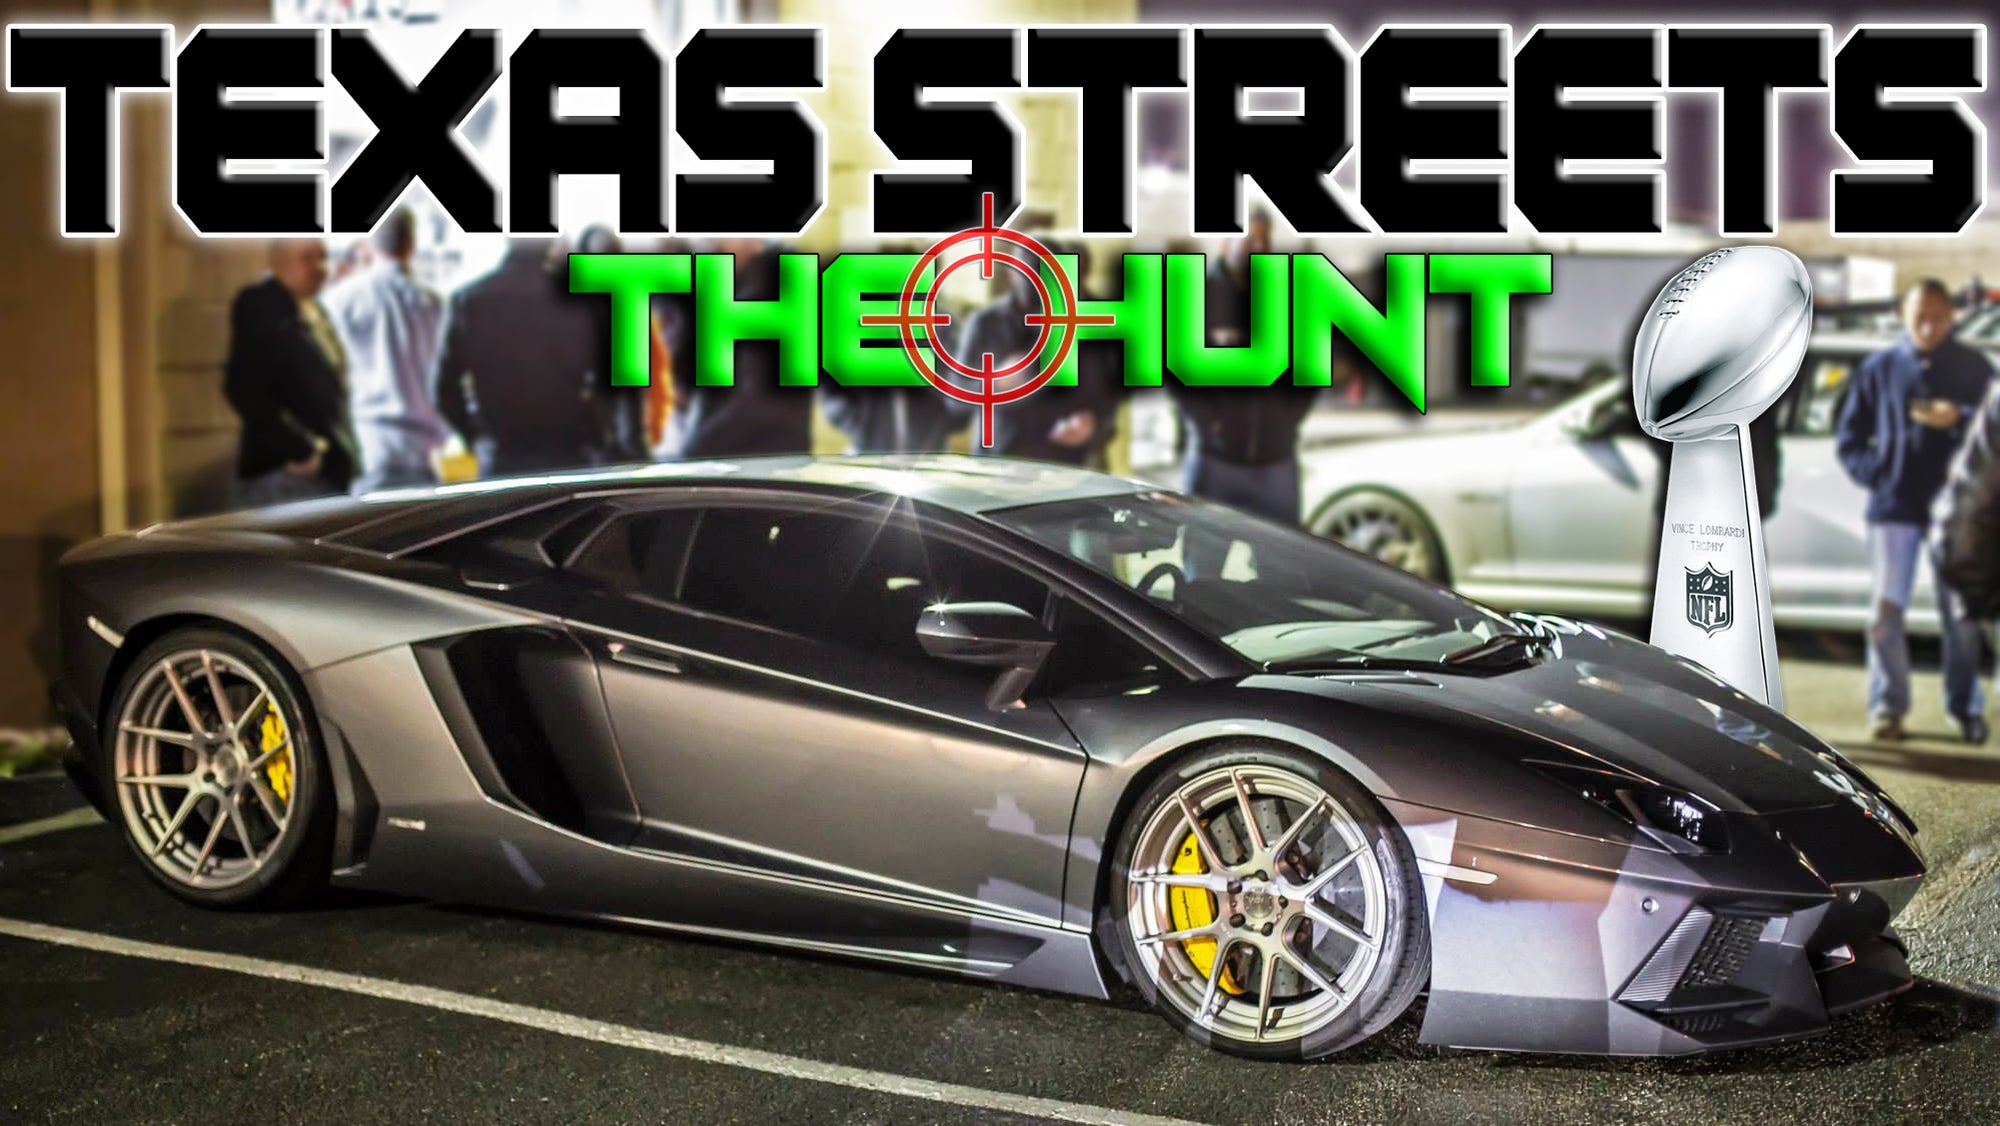 The SUPERBOWL of Street Racing (Texas Streets: The Hunt)